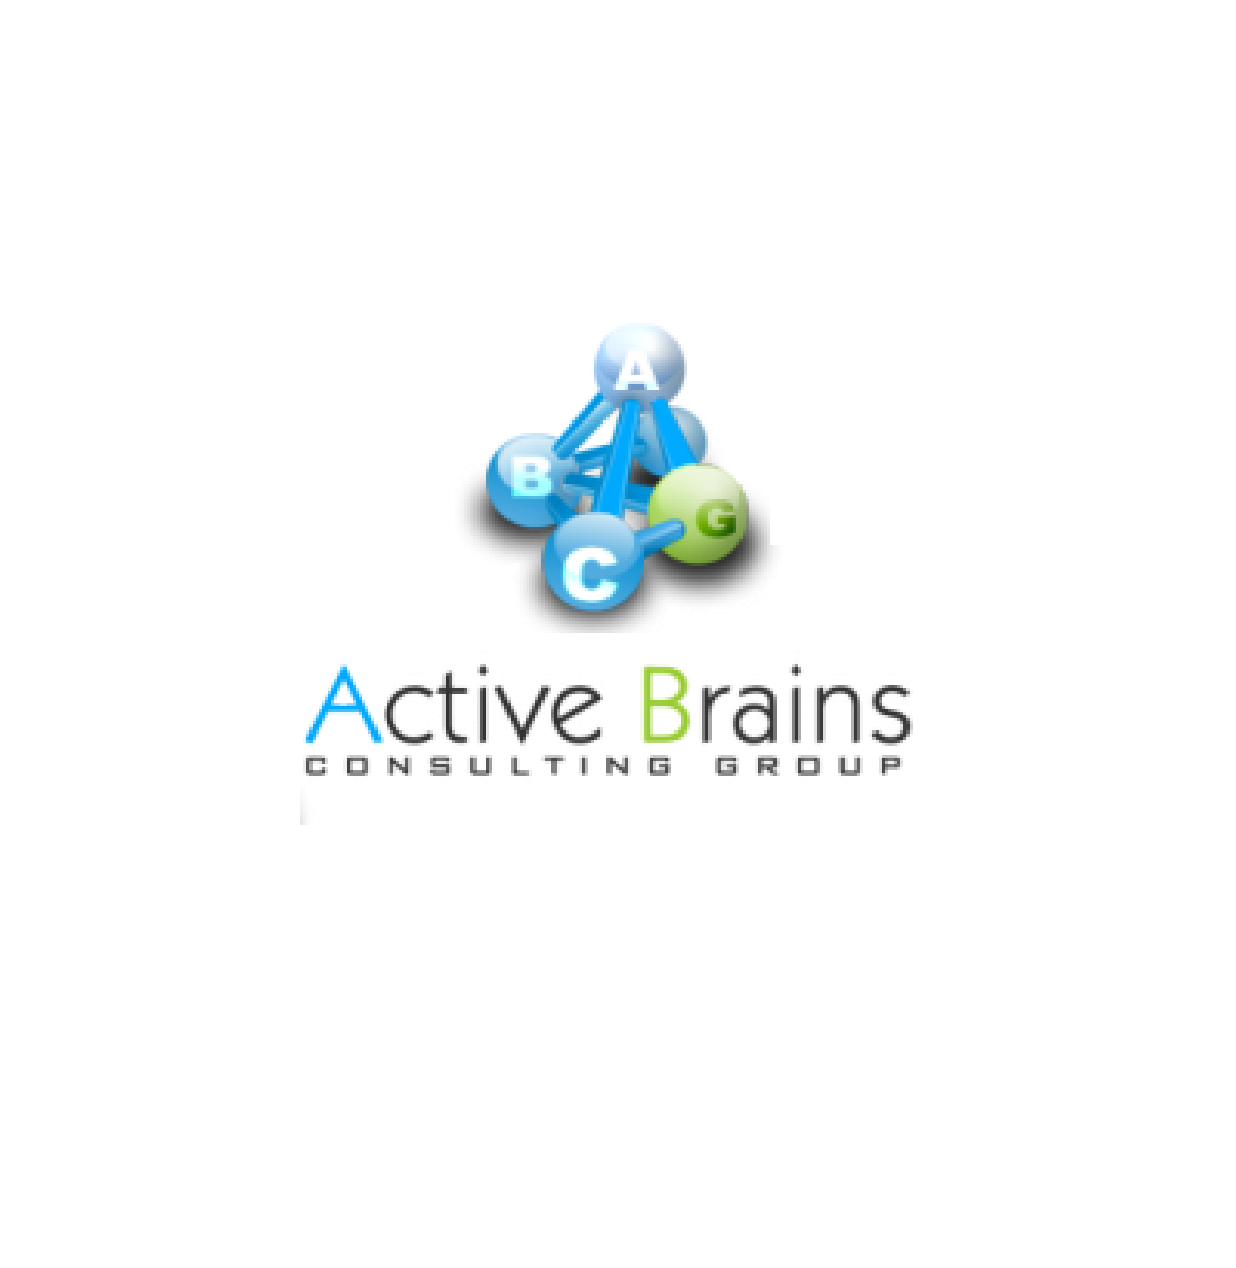 Active Brains Consulting Group